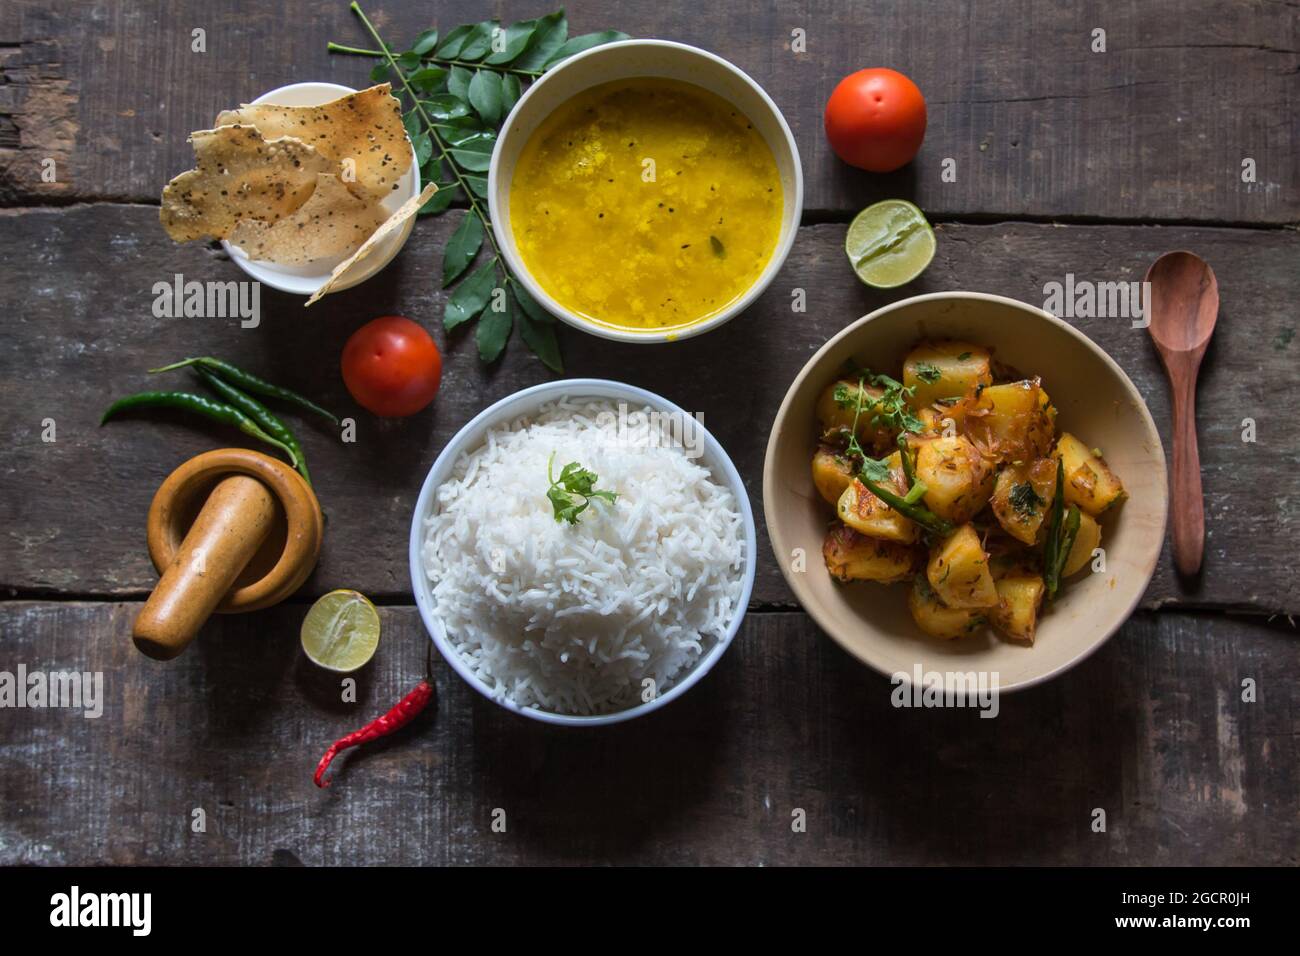 View from top of simple Indian food or meal with potato fry, rice, lentils, papad and condiments. Vegetarian dish. Stock Photo